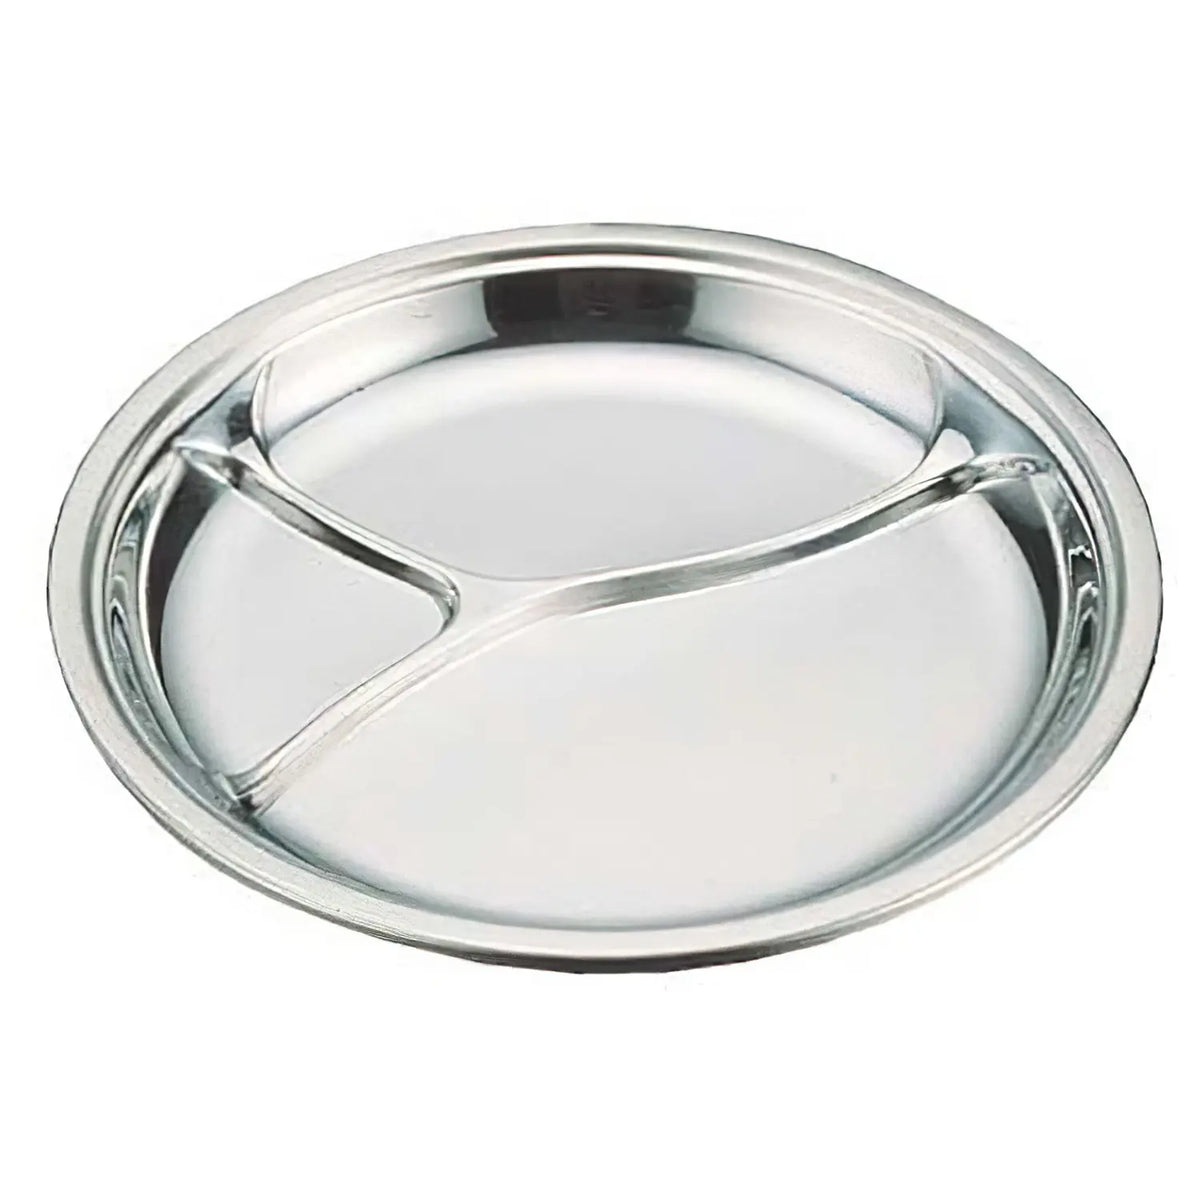 IKD ecoclean Stainless Steel 3 Compartments Lunch Plate